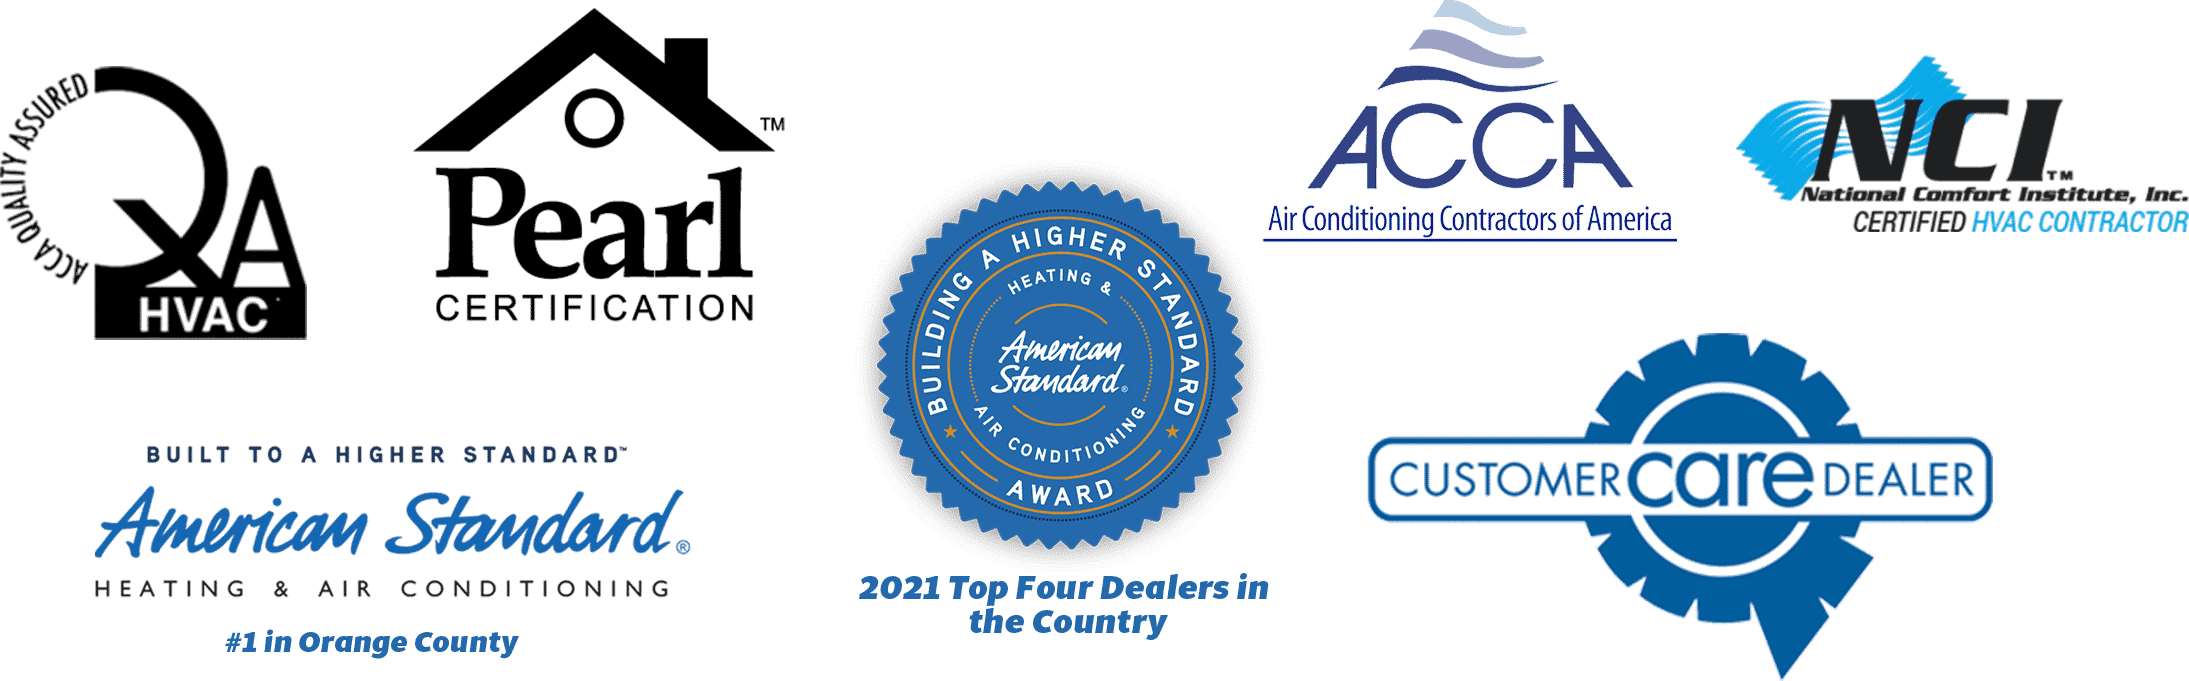 SoCal Airflow Pros awards and certifications include ACCA quality assured HVAC, Pearl certification, American Standard, Customer Care Dealer, and NCI certified HVAC contractor